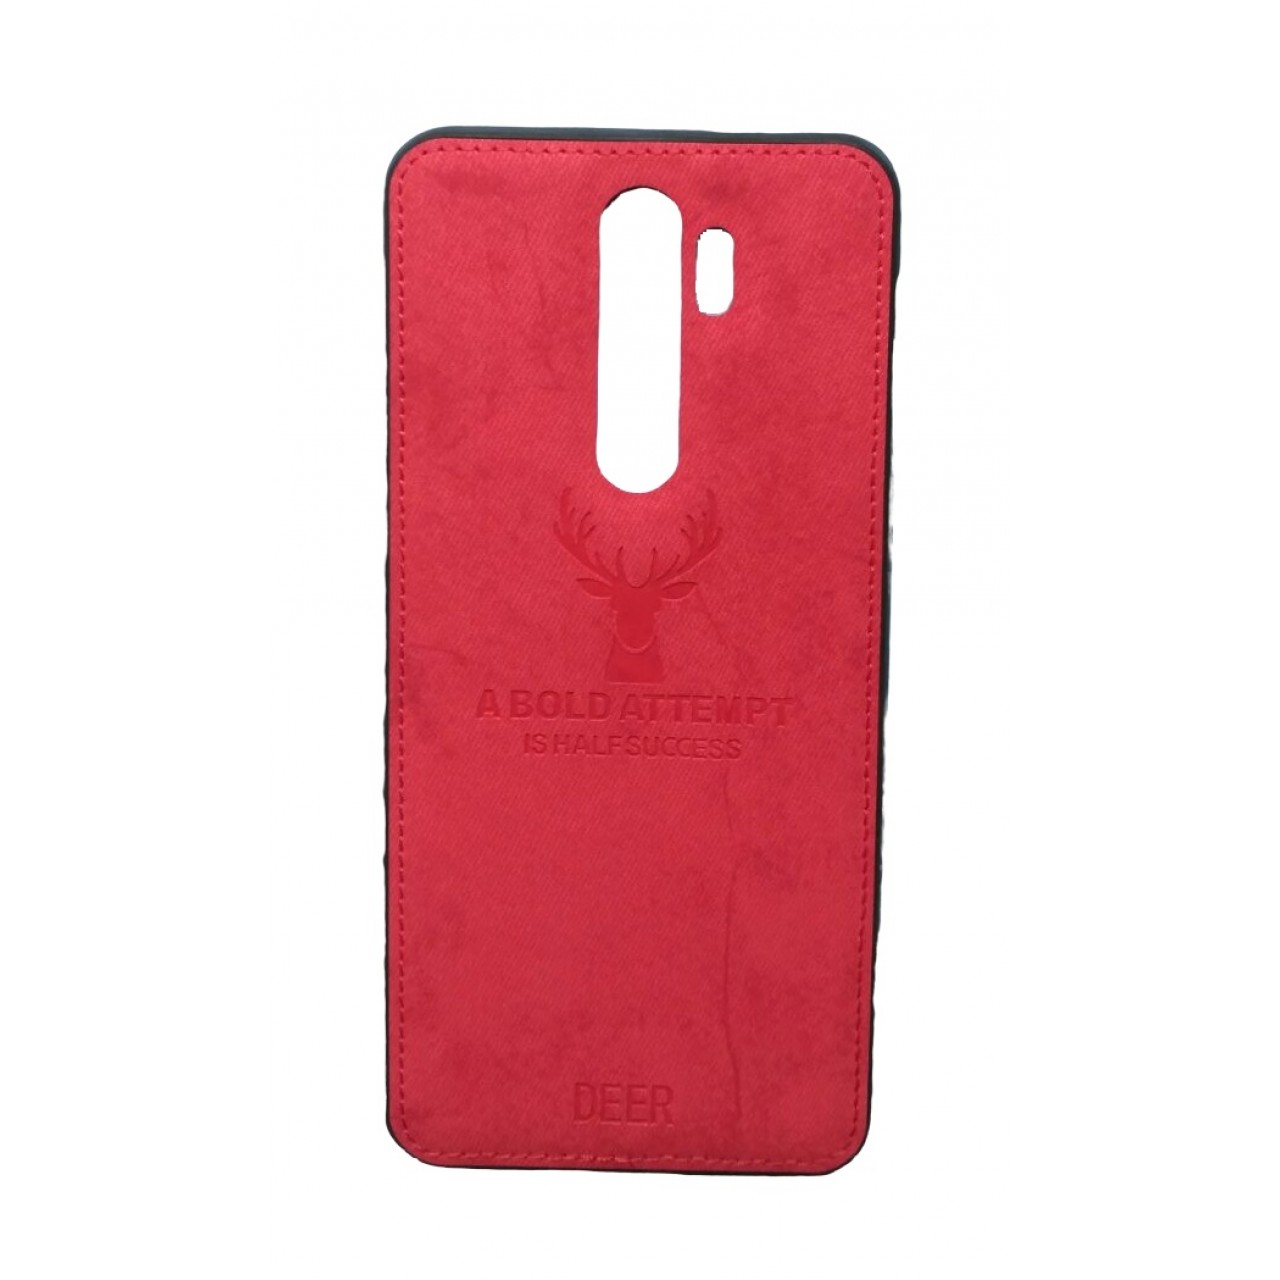 DEER CLOTH BACK CASE FOR XIAOMI REDMI NOTE 8 PRO - RED